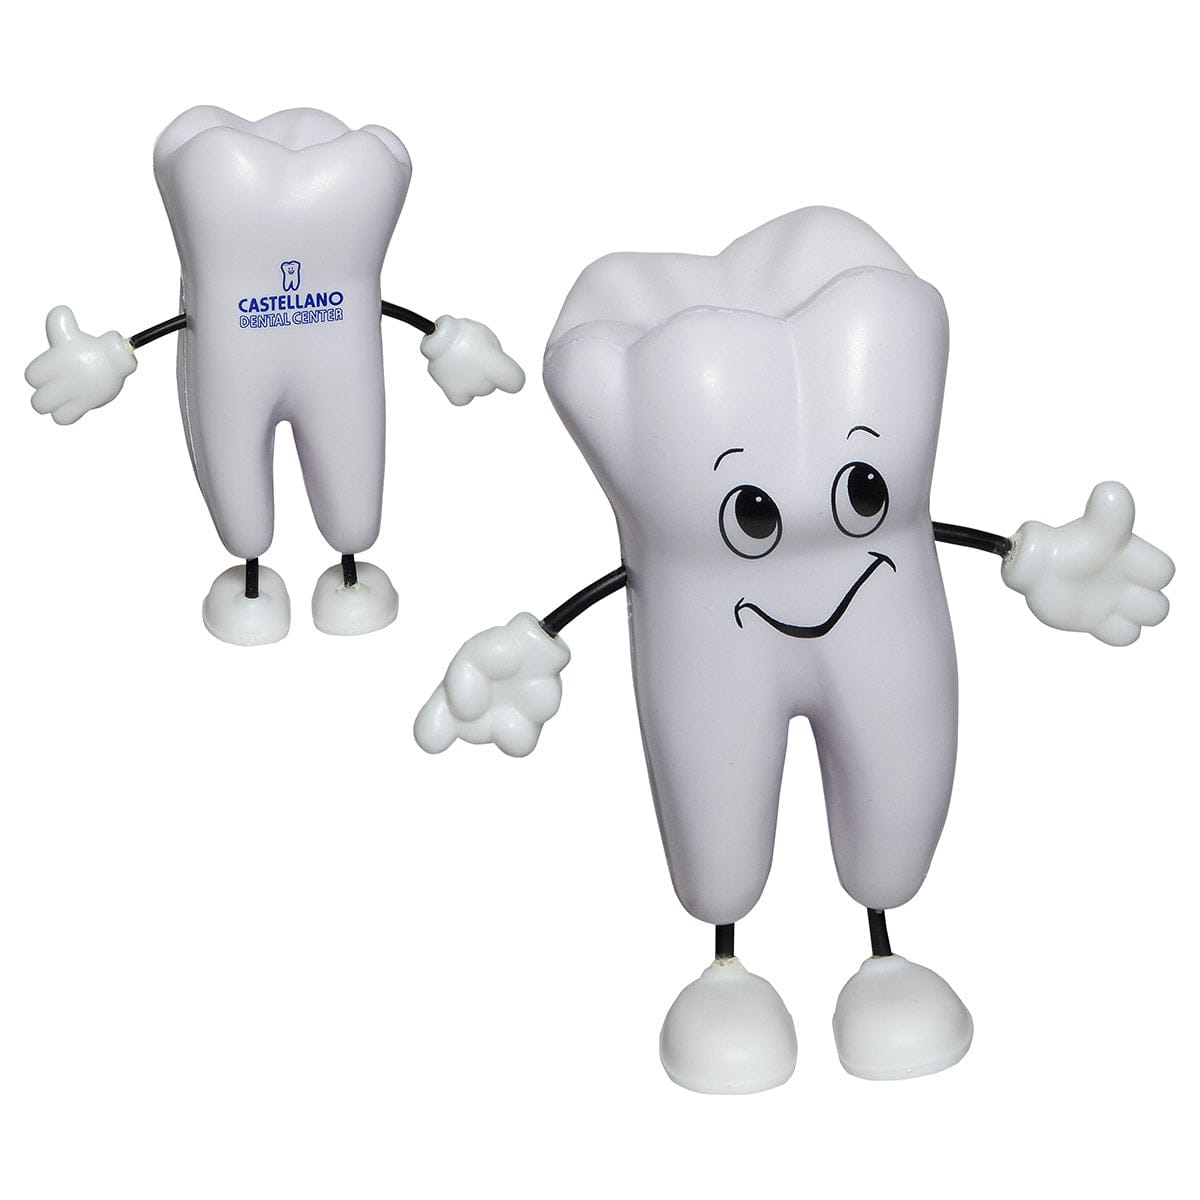 Threadfellows Accessories One Size / White Tooth Shaped Stress Reliever Figurine